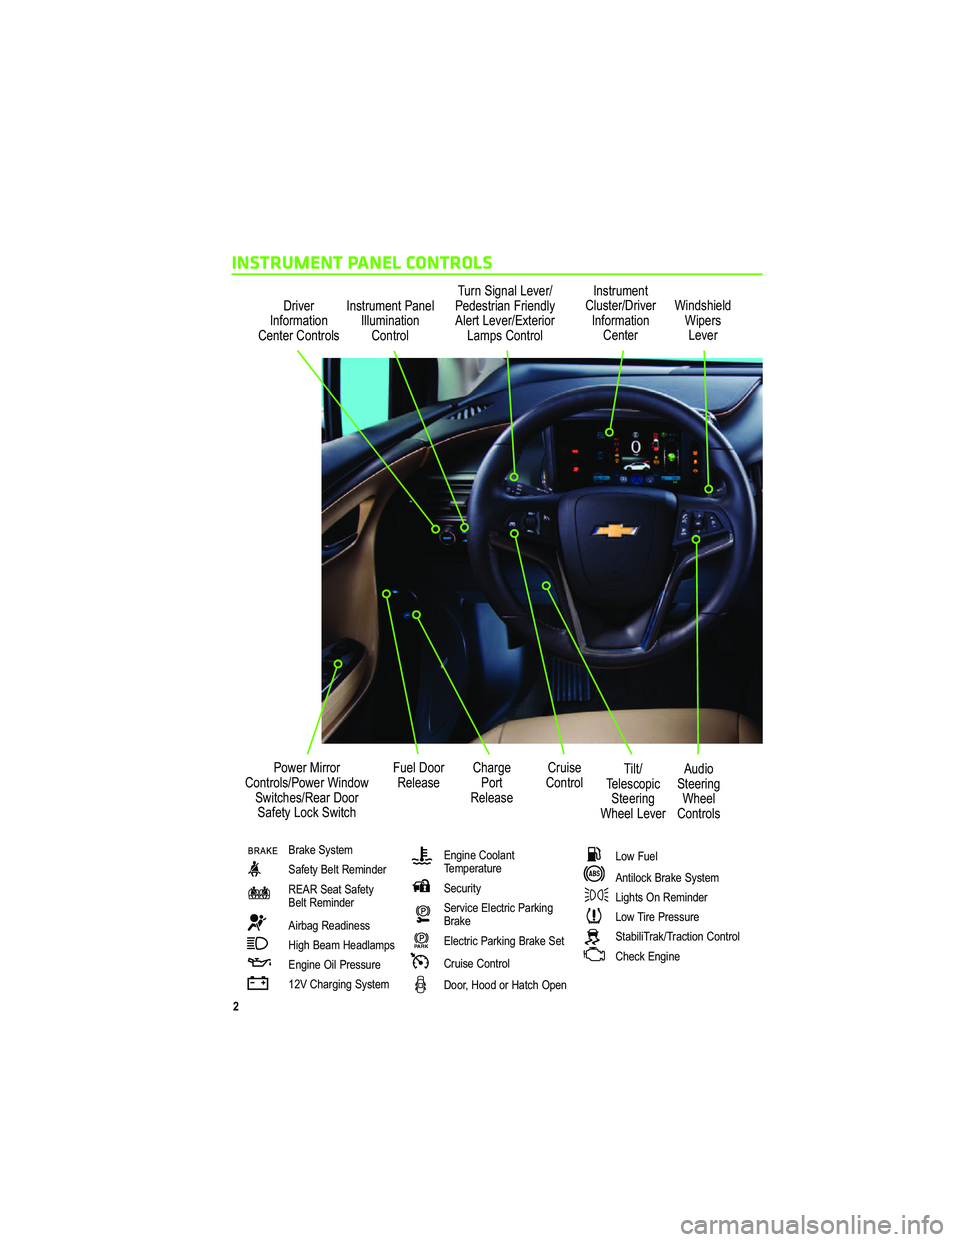 CHEVROLET VOLT 2011  Get To Know Guide 	
>5B 1 >
 : 2; >9 -@5; :
 1:@1 >  ;:@> ; 8? 
: ?@> A 9 1:@  $ -:18
 88A 9 5: -@5; :
 ;:@> ; 8 (
A>:   53 :-8  " 1B1 >
$ 101?@> 5- :  >51 :08E
 81 >@  " 1B1 > D@1 >5; >
" -9 <?  ;:@> ; 8